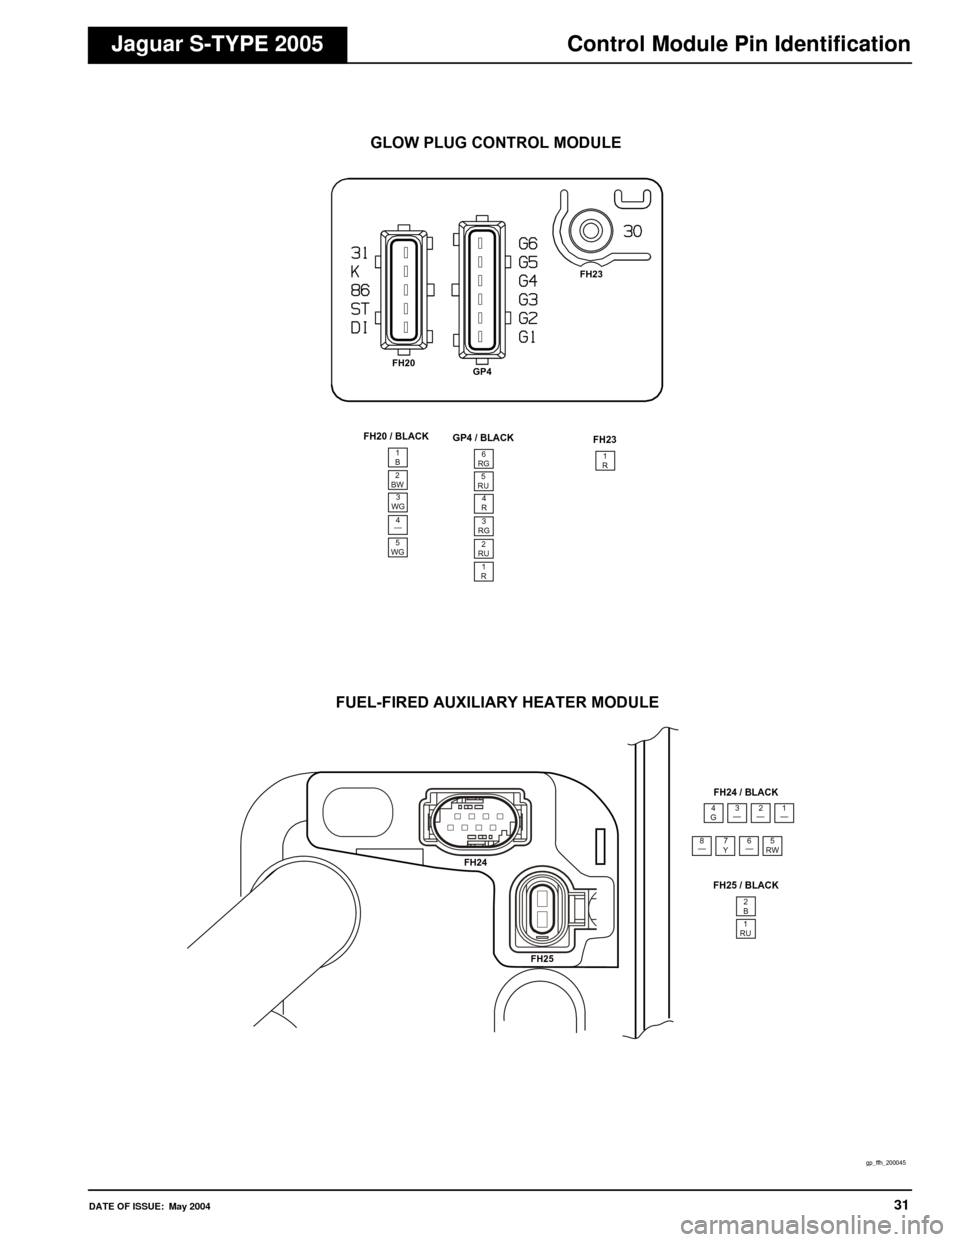 JAGUAR S TYPE 2005 1.G Electrical Manual 
DATE OF ISSUE: May 200431
Control Module Pin IdentificationJaguar S-TYPE 2005
1B2BW3
WG
4
5
WG
FH20 / BLACK
6RG5RU4
R
3
RG2
RU
GP4 / BLACK
1
R
1R
FH23
2B1RU
FH25 / BLACK
FH24 / BLACK
GLOW PLUG CONTRO